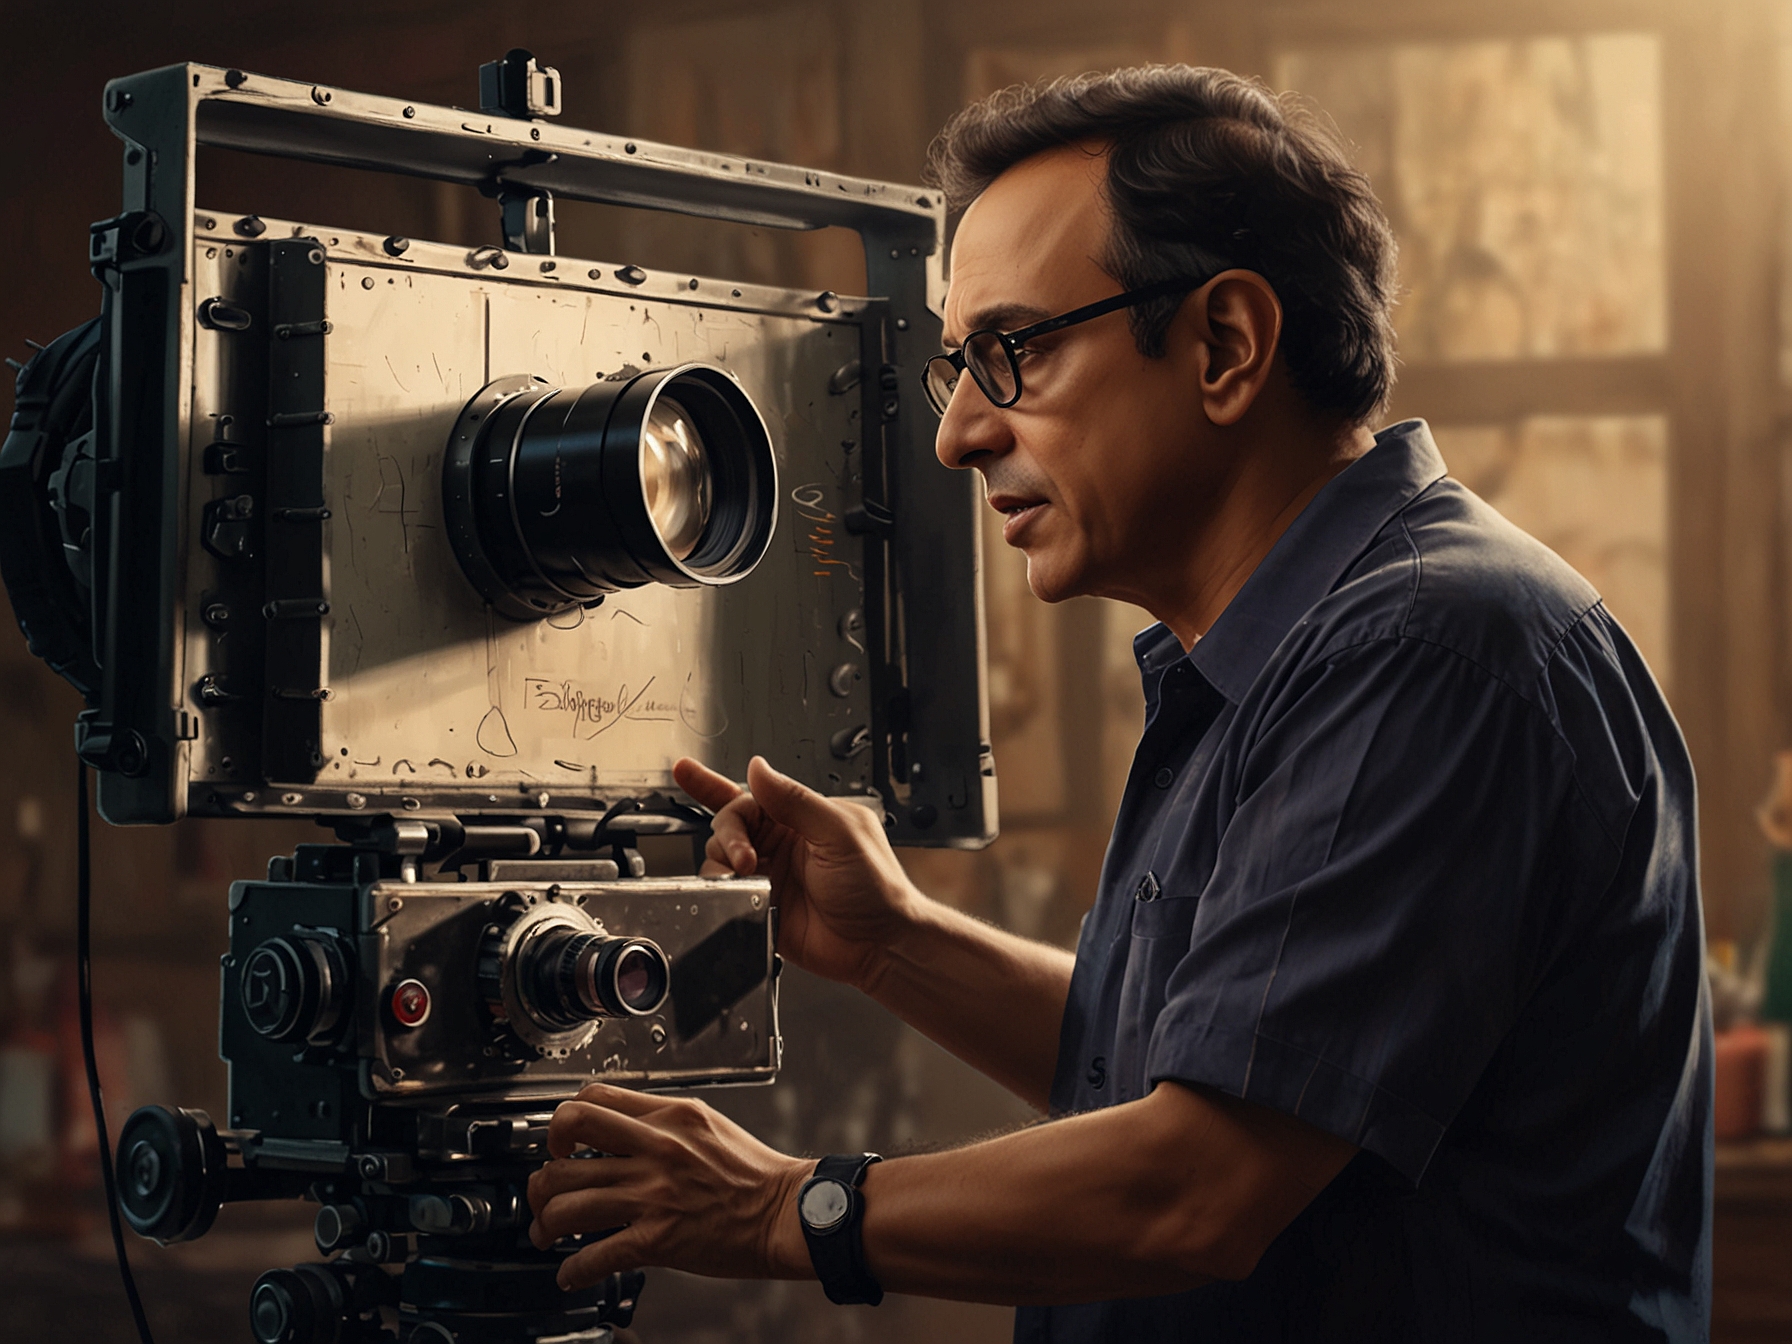 Image of Vidhu Vinod Chopra directing on set, showcasing his meticulous nature and high standards. This visual represents his dedication to the filmmaking process and attention to detail.